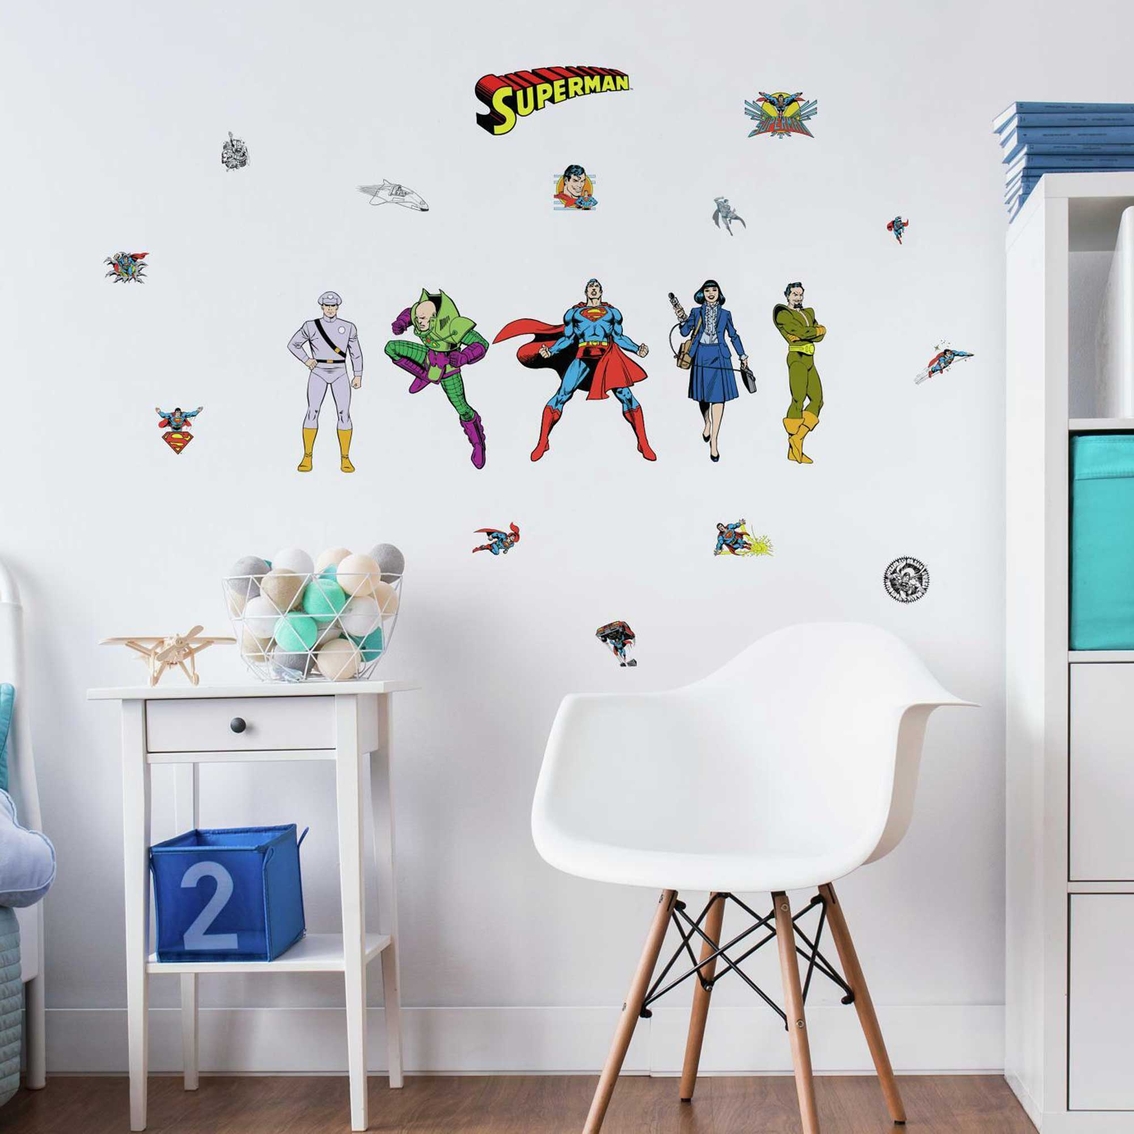 RoomMates Classic Superman Characters Peel and Stick Wall Decals - Image 2 of 5